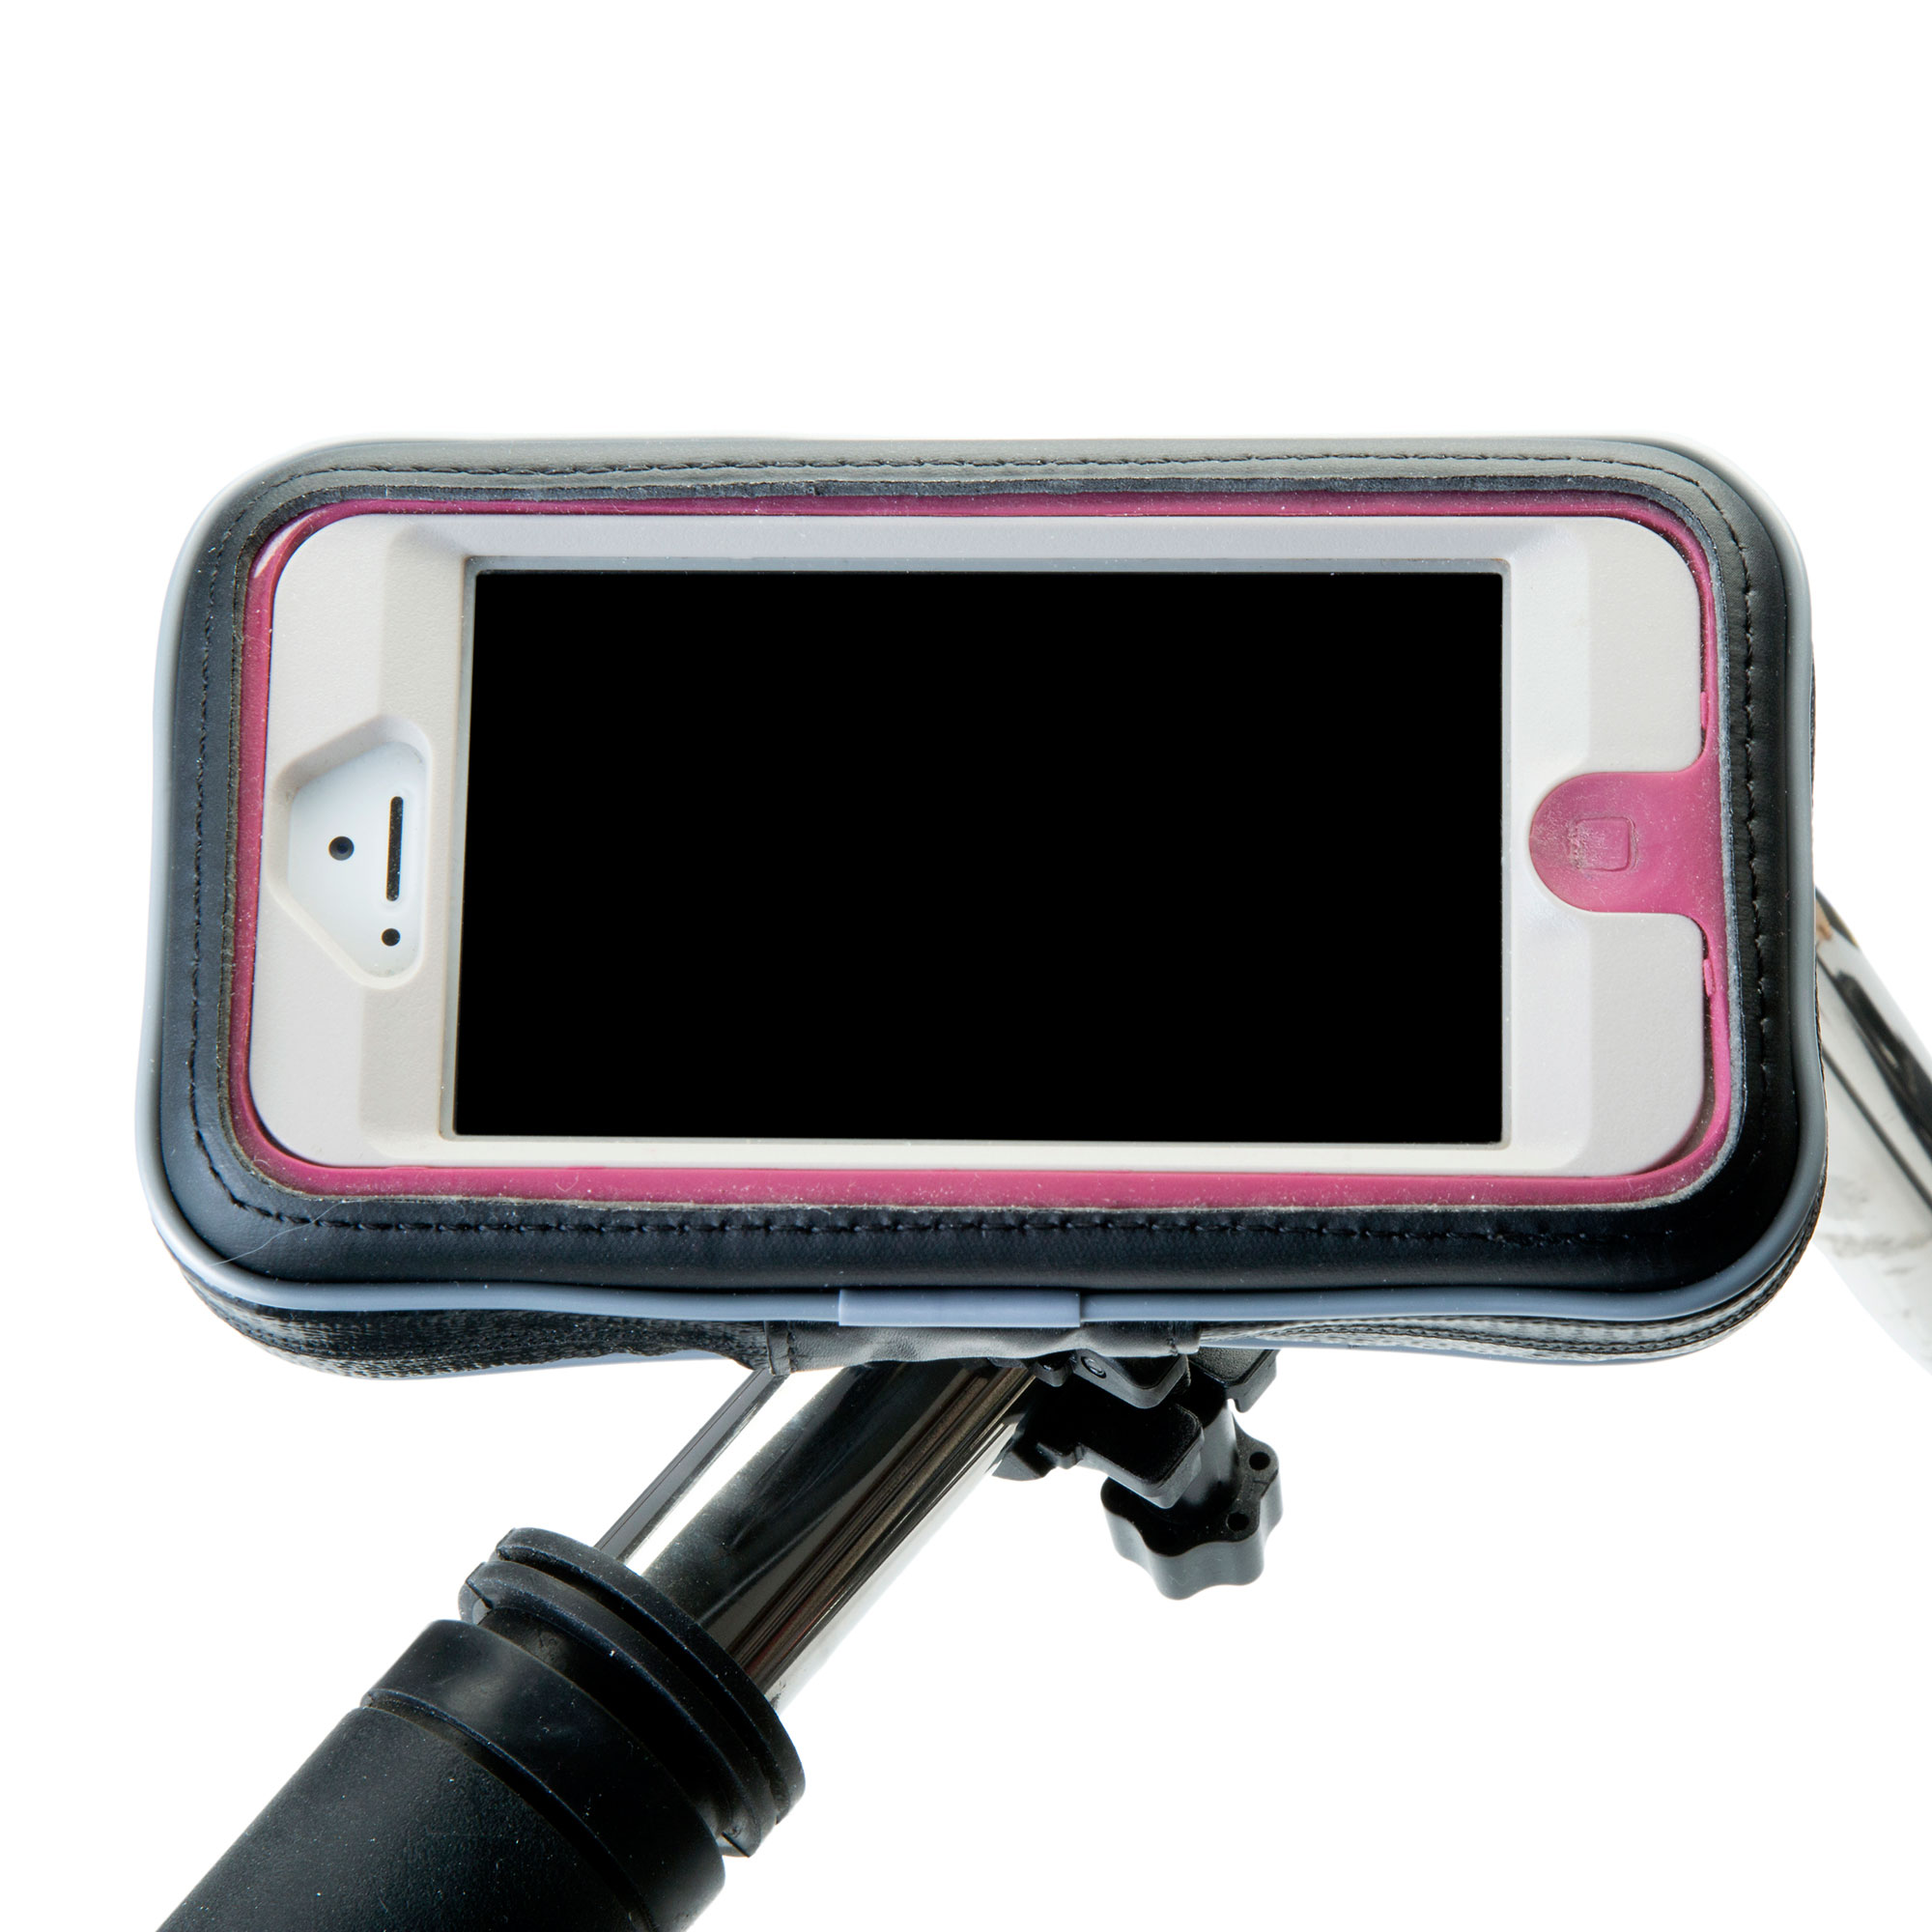 Heavy Duty Weather Resistant Bicycle / Motorcycle Handlebar Mount Holder Designed for the LG Rumor Touch